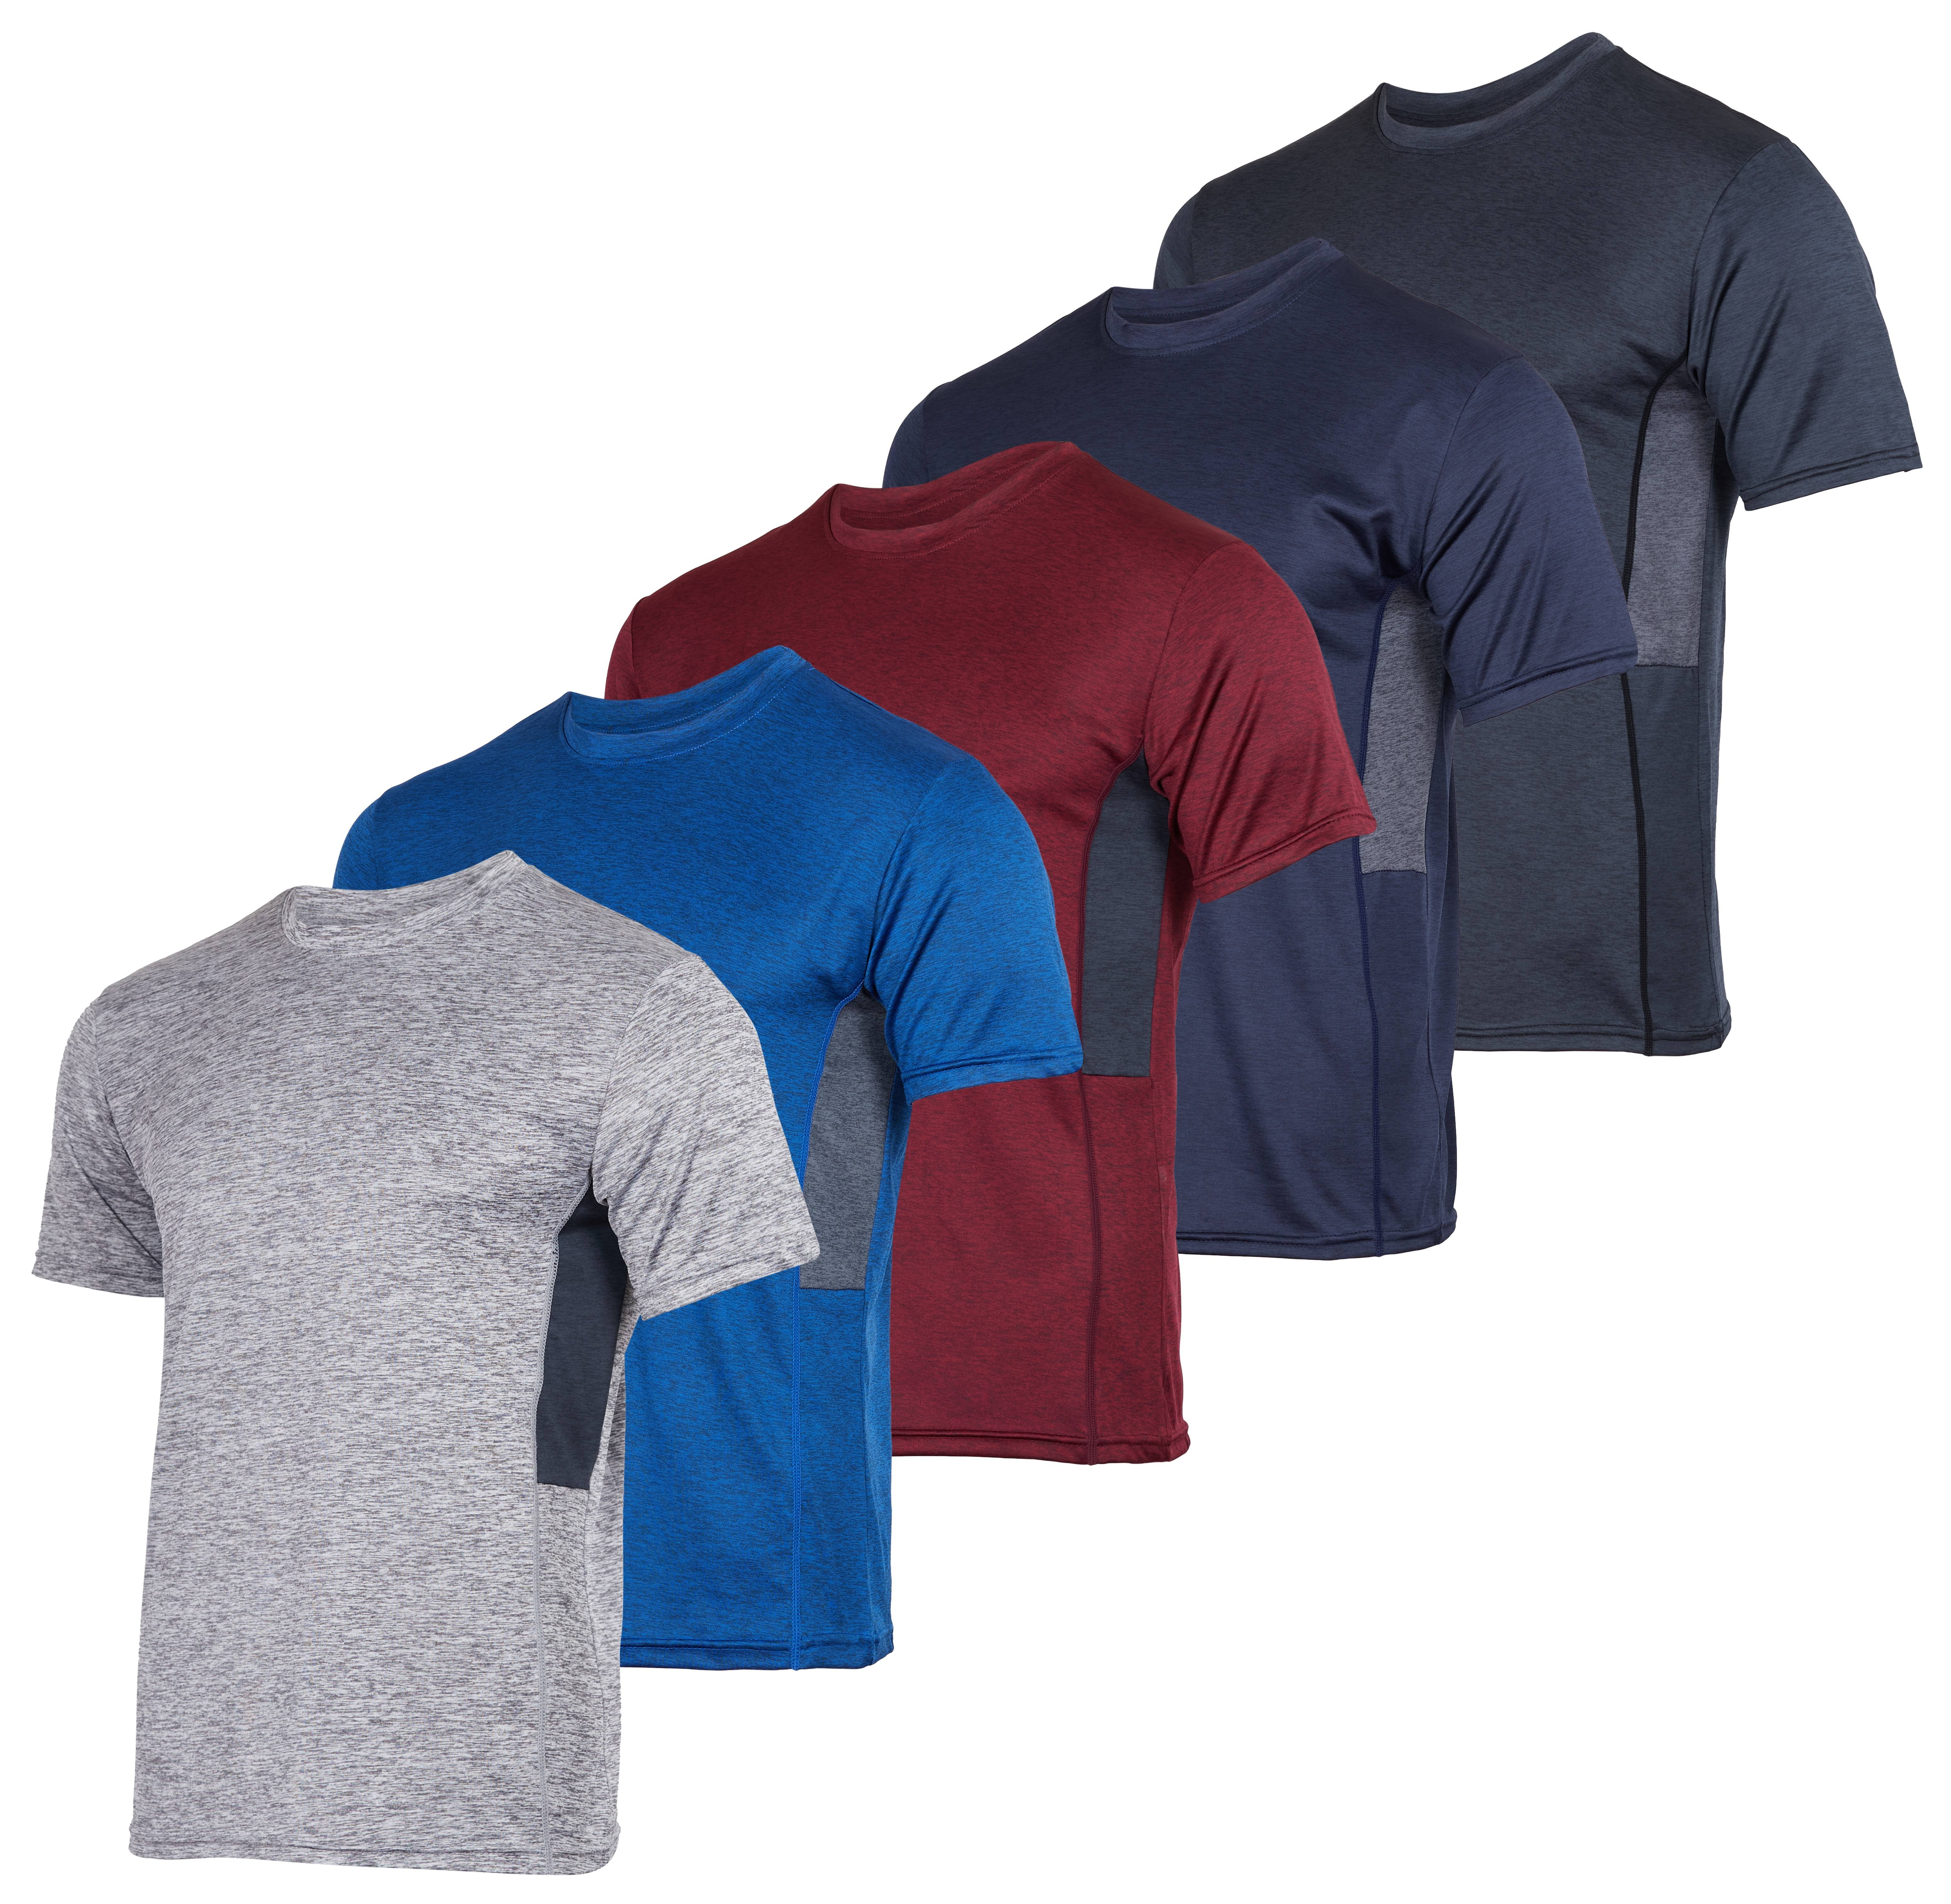 Real Essentials 5 Pack: Men's Dry-Fit Moisture Wicking Active